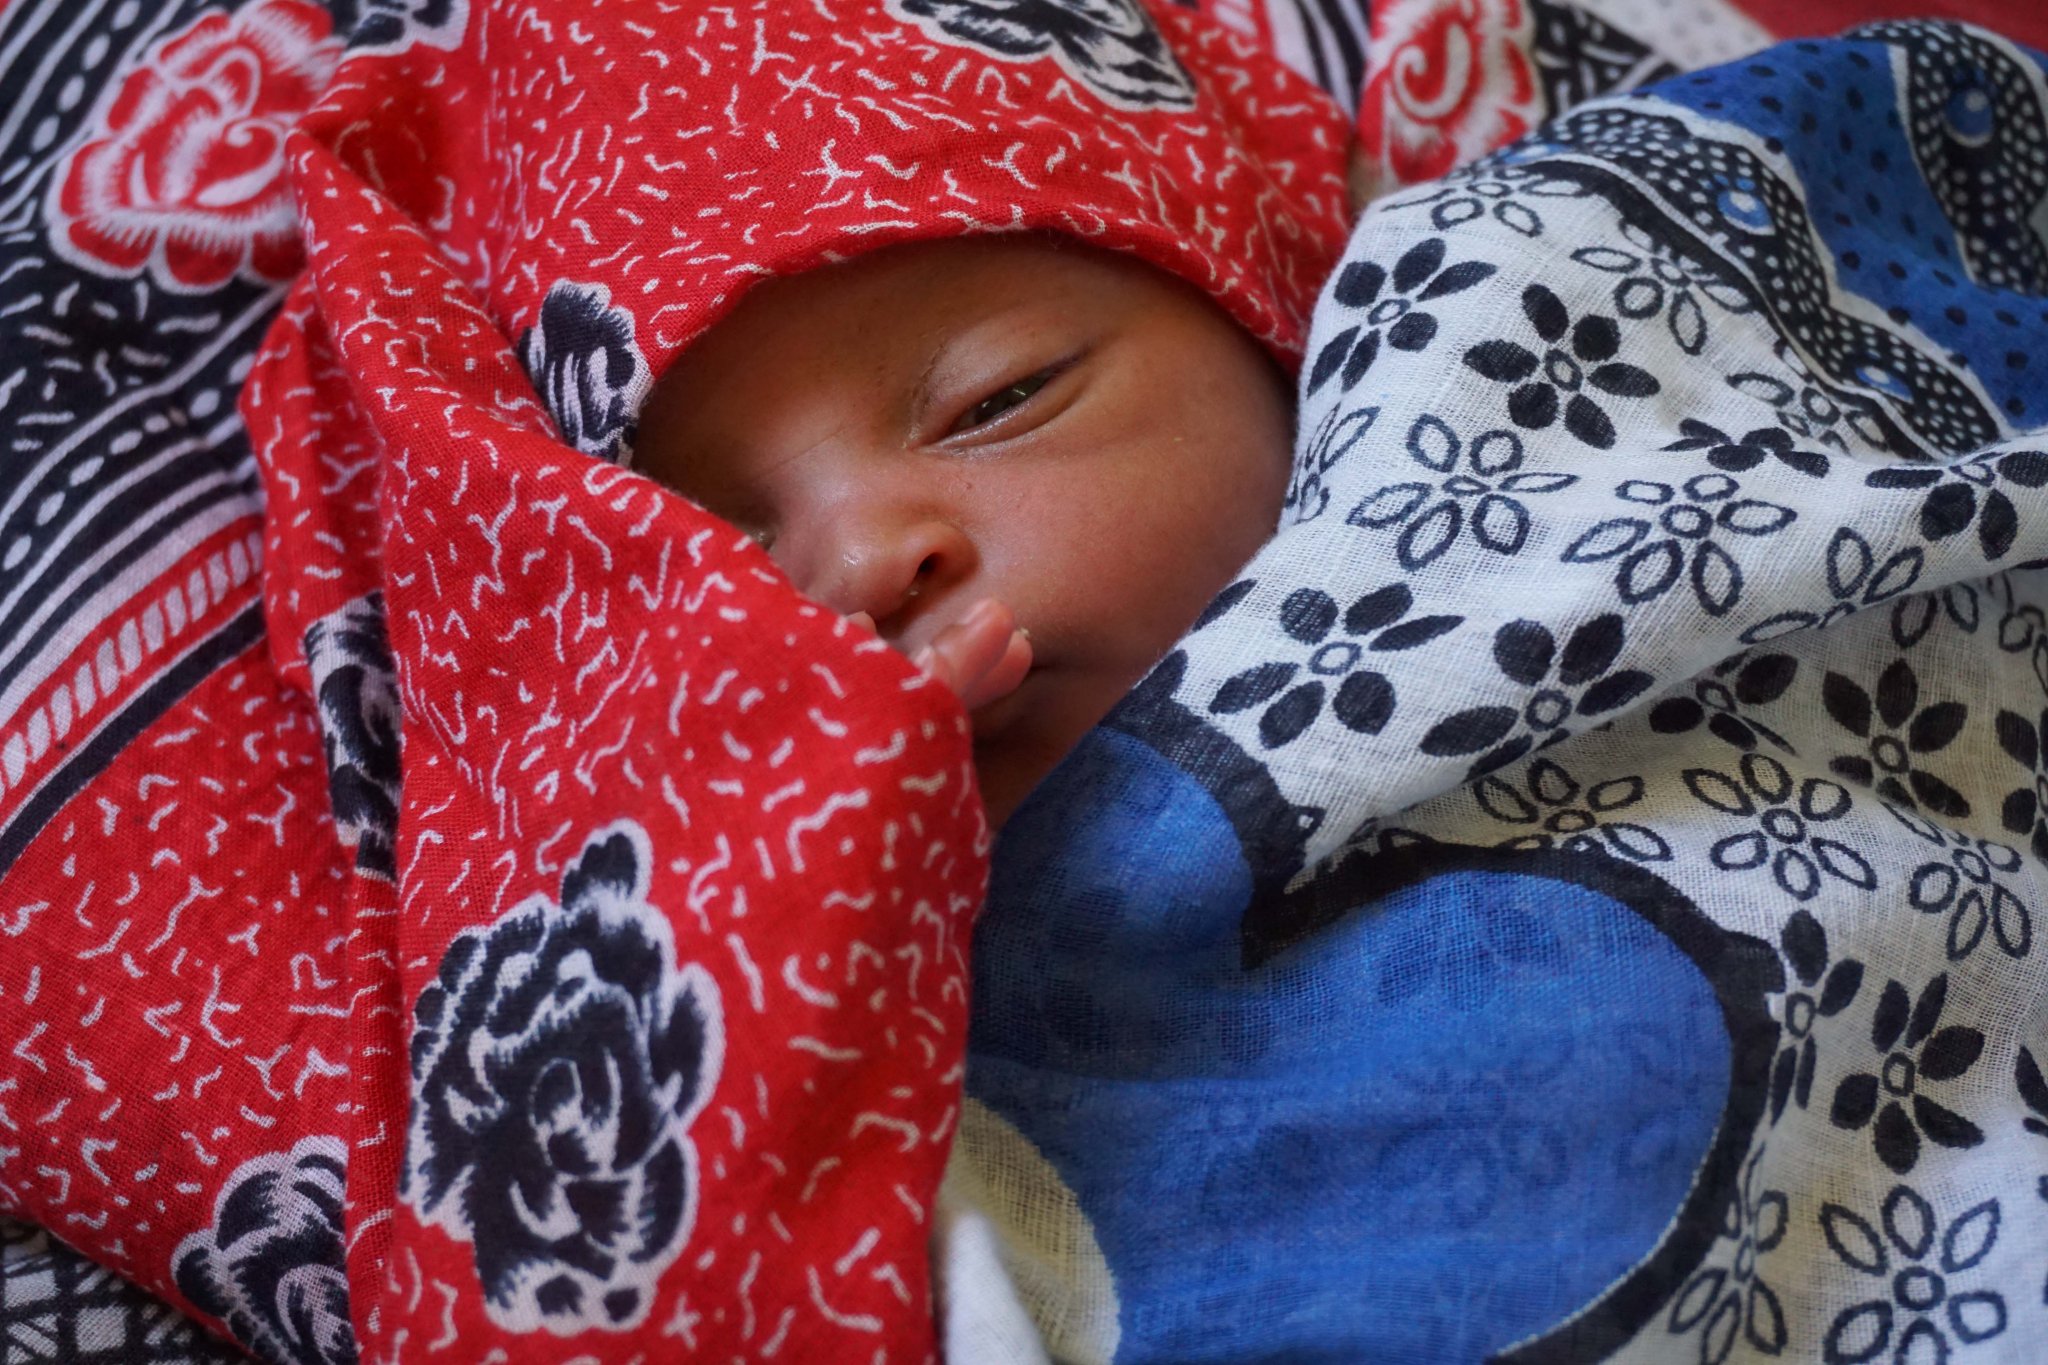 Newborn in Kivunge hospital, Zanzibar, Tanzania. Improving hospital architecture with an empathic approach can support quality of care and save lives.